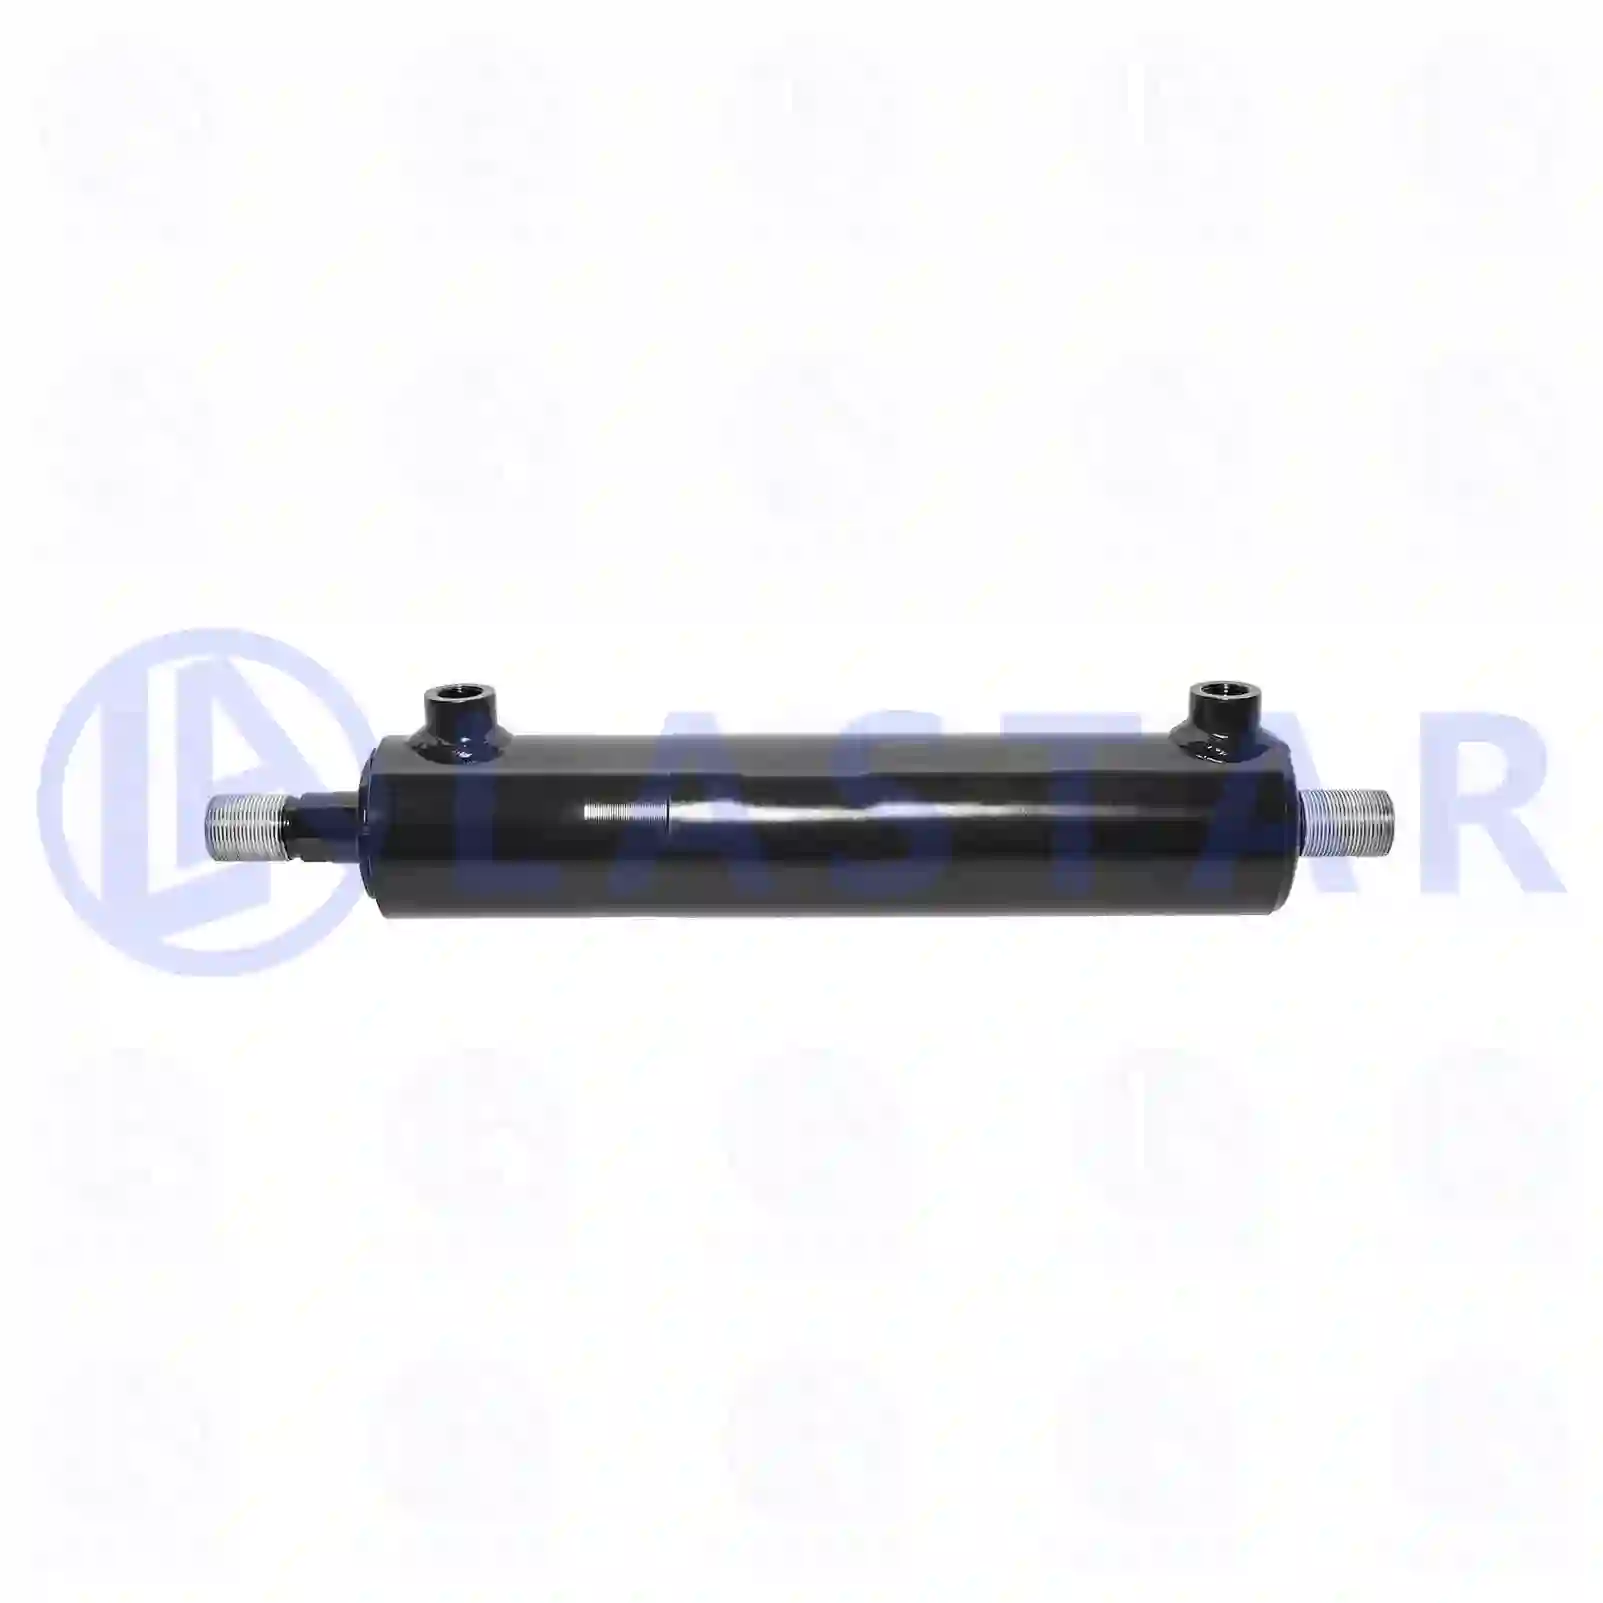 Hydraulic cylinder, steering, 77706007, 1364258, 1500068, ZG40544-0008, , , ||  77706007 Lastar Spare Part | Truck Spare Parts, Auotomotive Spare Parts Hydraulic cylinder, steering, 77706007, 1364258, 1500068, ZG40544-0008, , , ||  77706007 Lastar Spare Part | Truck Spare Parts, Auotomotive Spare Parts